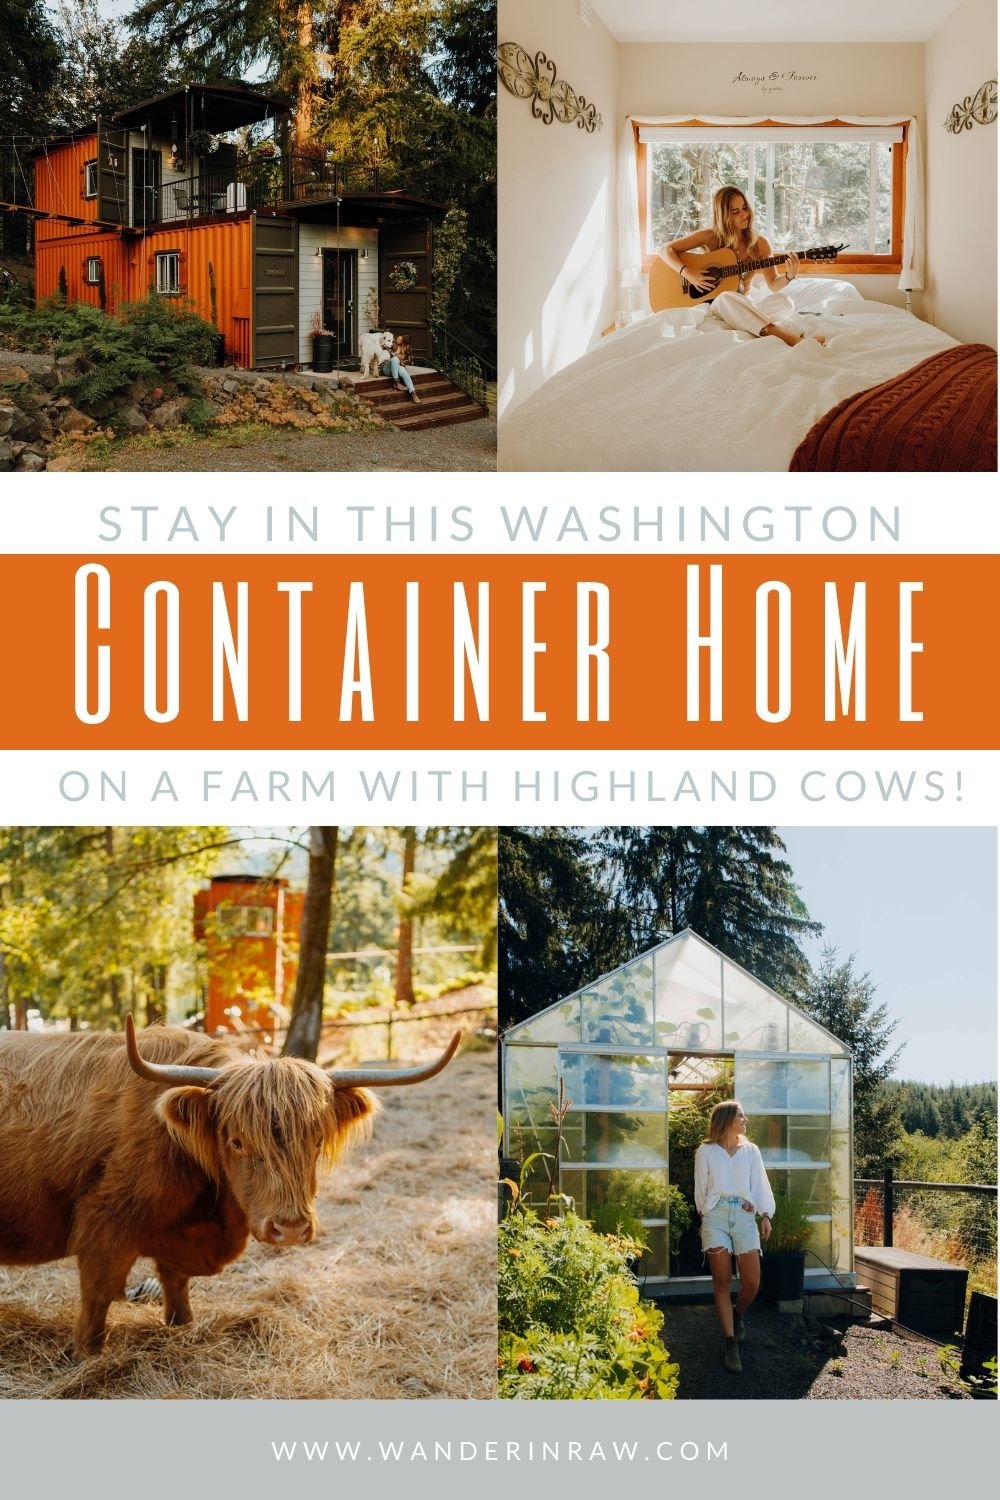 Unique Stay: Rent a Container Home with Highland Cows